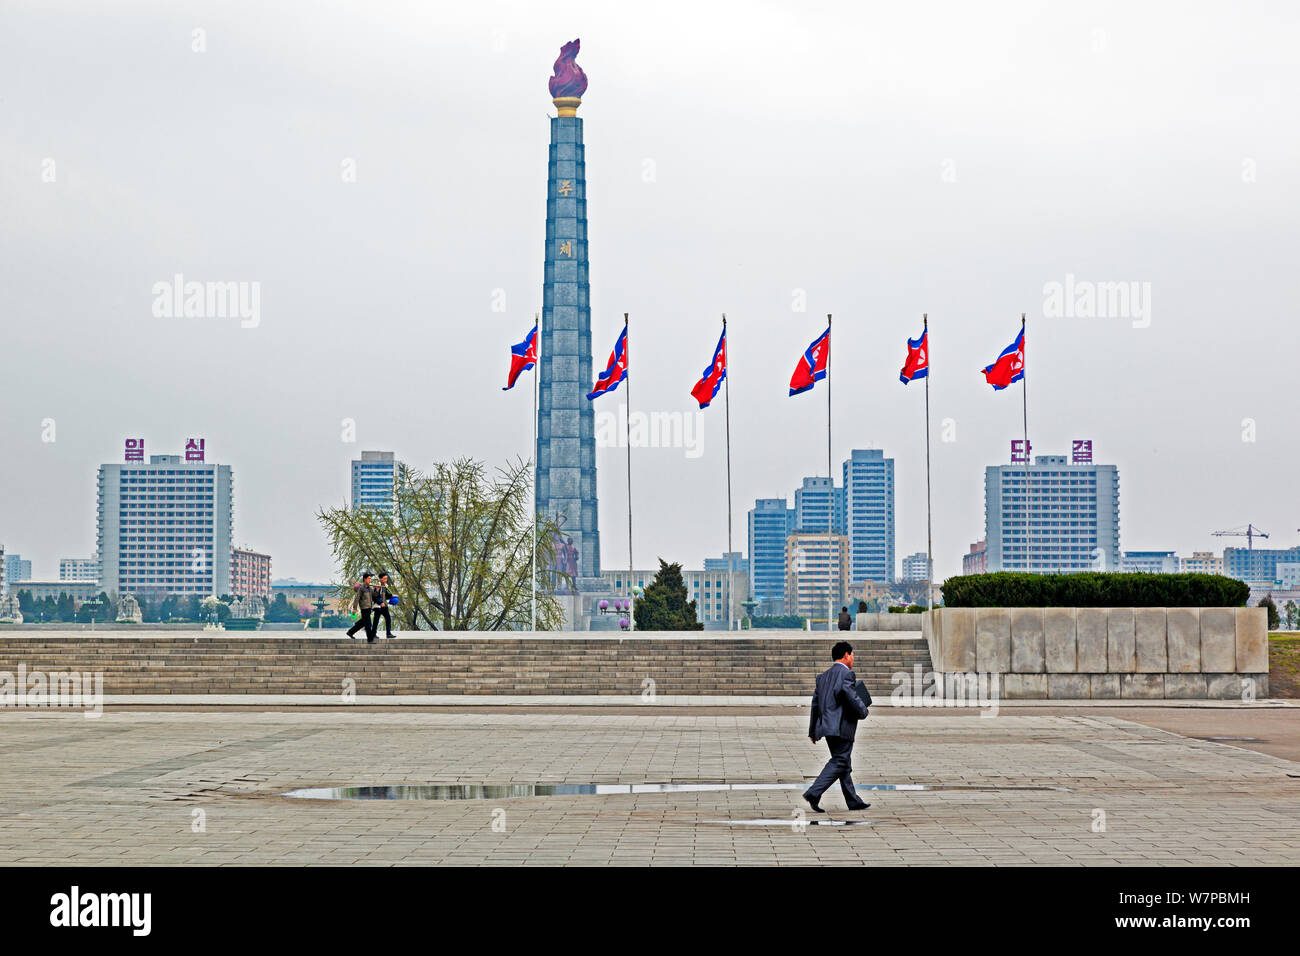 Man walking infront of Juche Tower and the Taedong river, Pyongyang, Democratic Peoples' Republic of Korea (DPRK), North Korea, 2012 Stock Photo